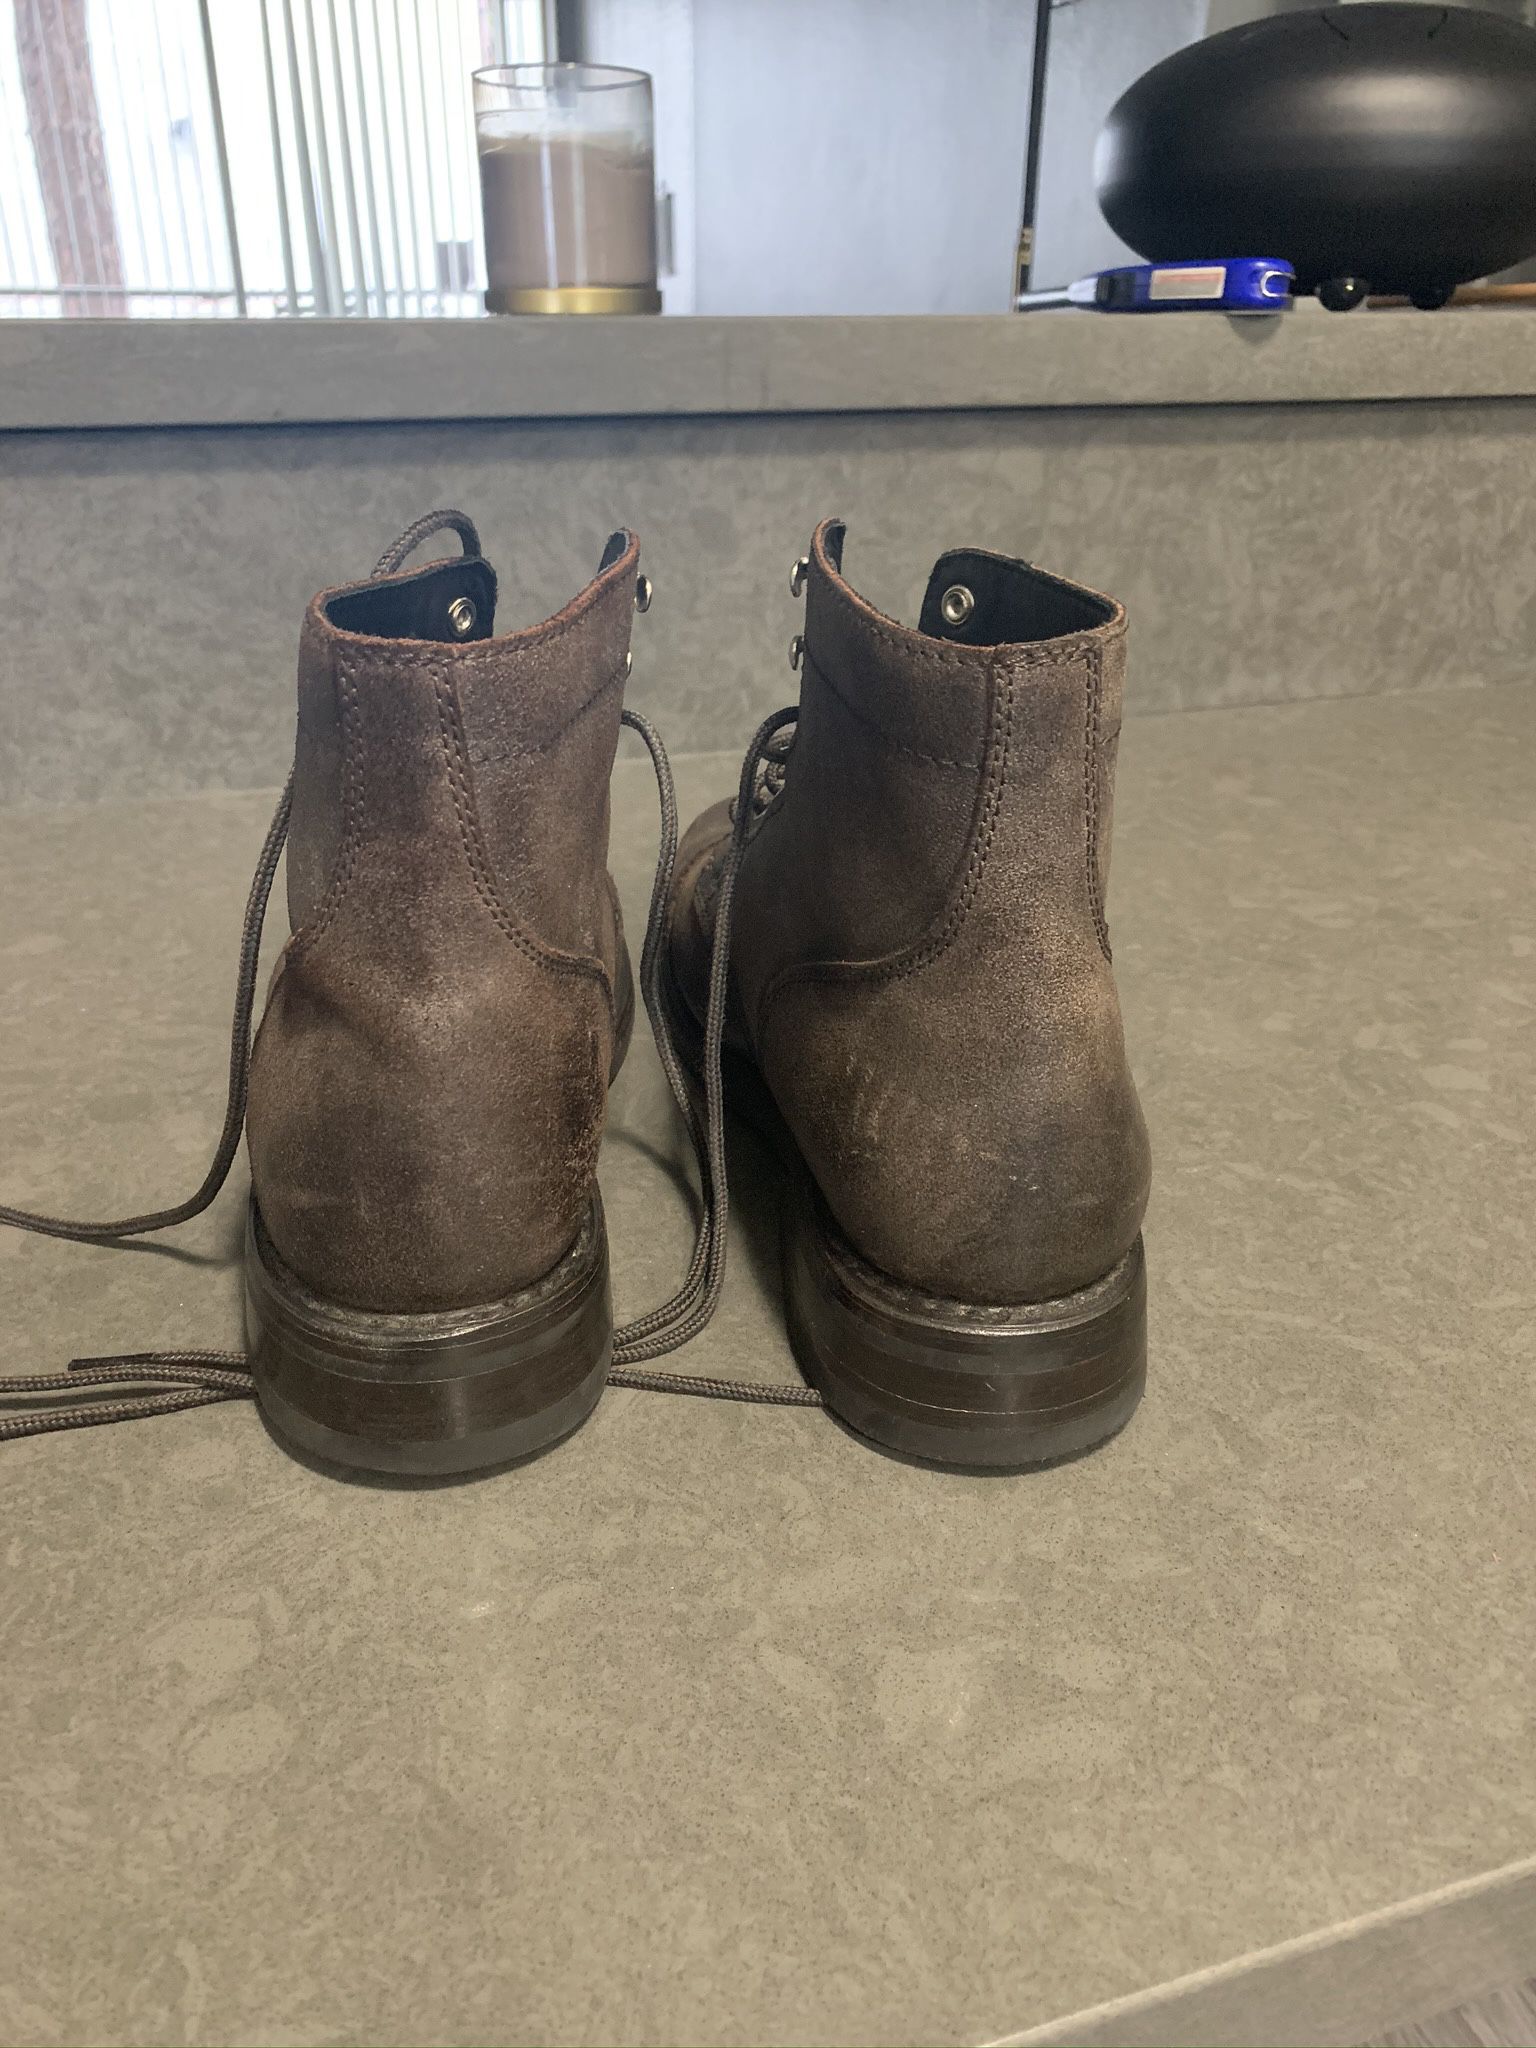 Imran Potato Caveman Feet Shoes for Sale in Los Angeles, CA - OfferUp